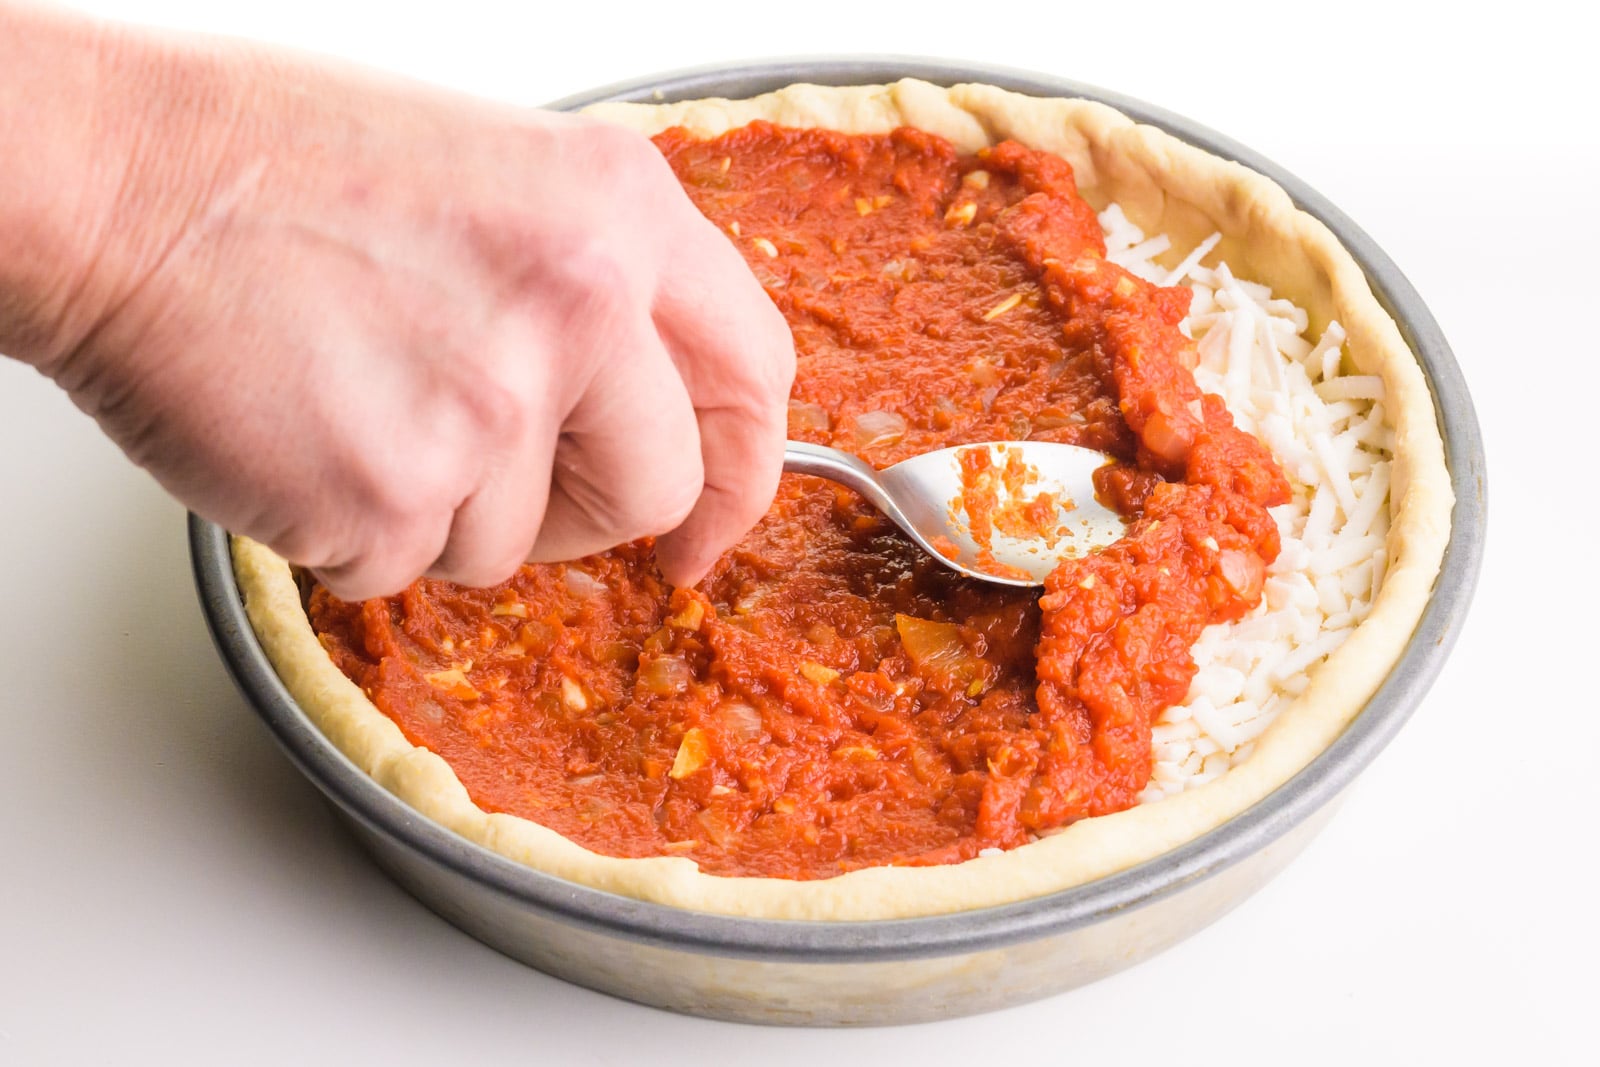 A hand holds a spoon, spreading tomato sauce over a pizza.